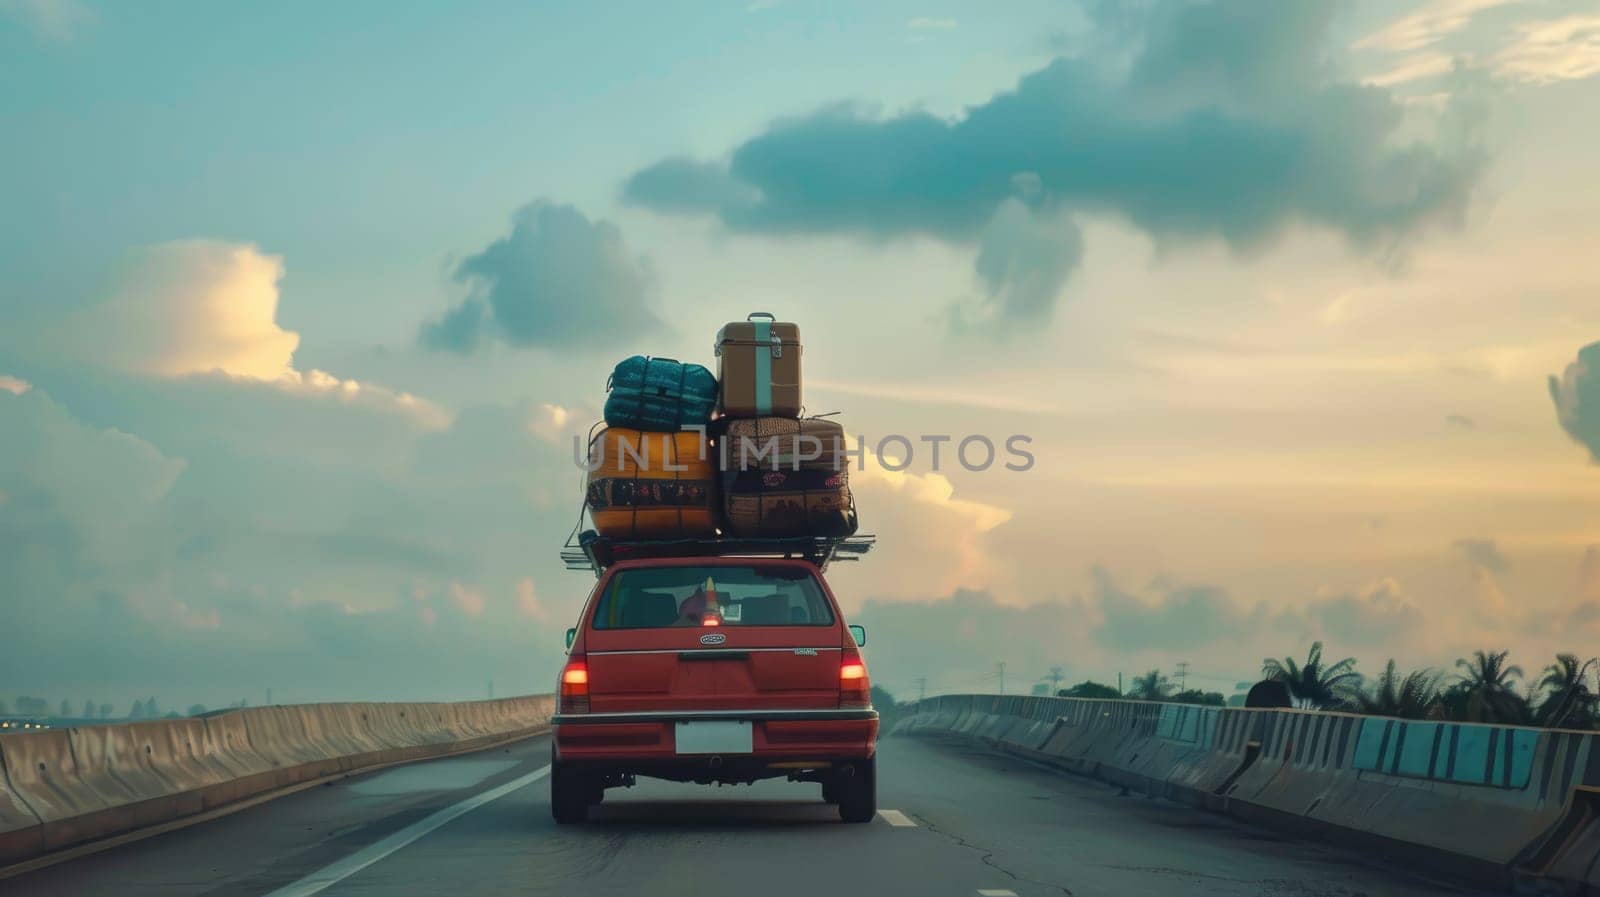 A car with luggage strapped on top with rural road landscape.